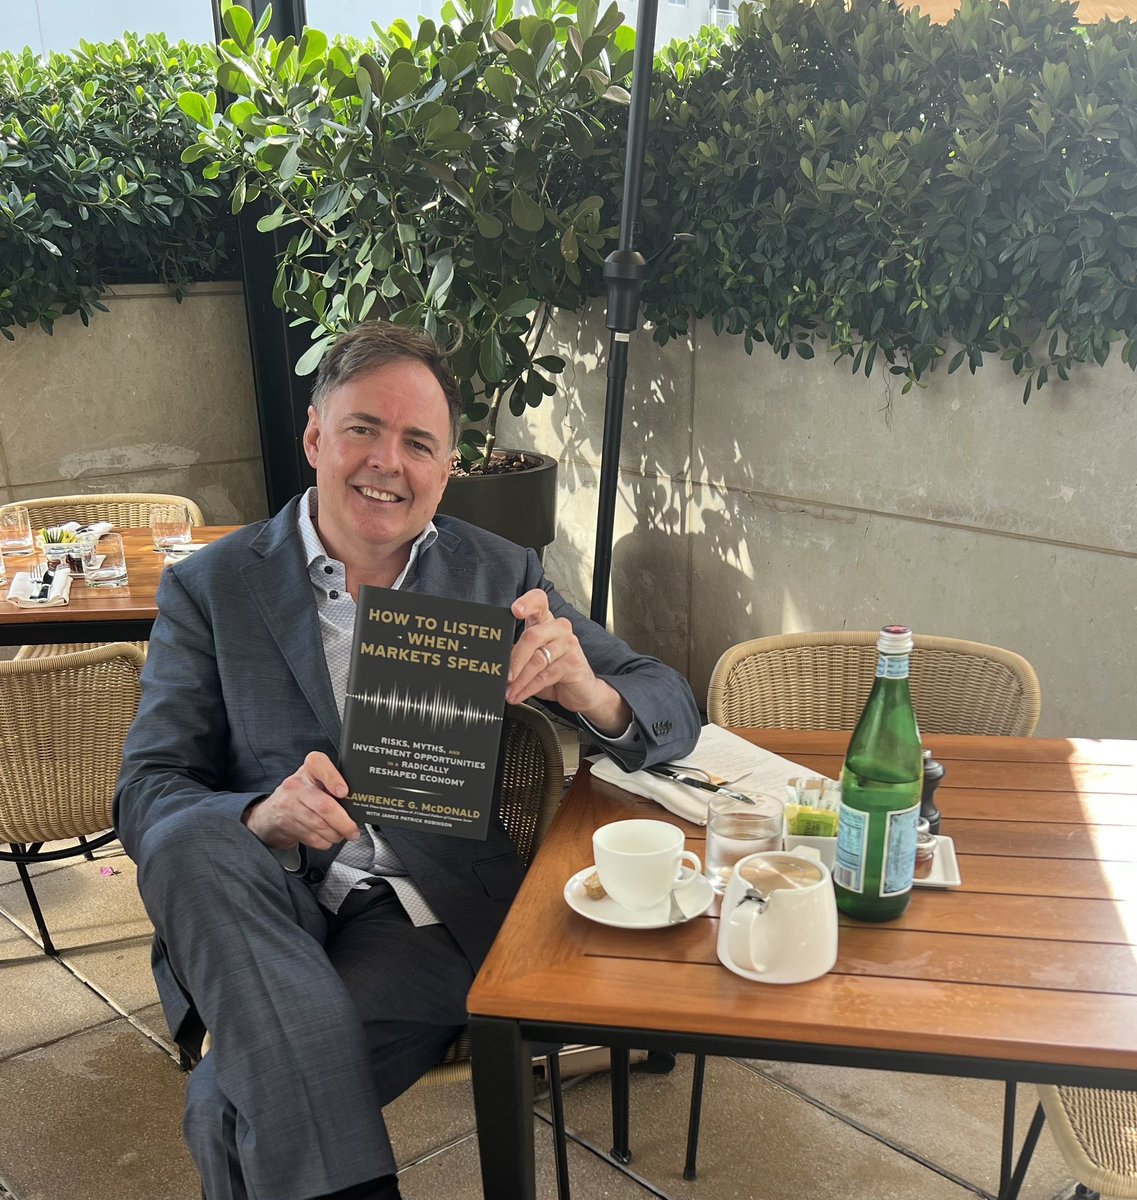 Special thanks to the Four Seasons for hosting our events this week.

#booksigning
#Bestseller
#familyoffice
#assetmanagement
#economy
#commodities
#inflation 
#miami